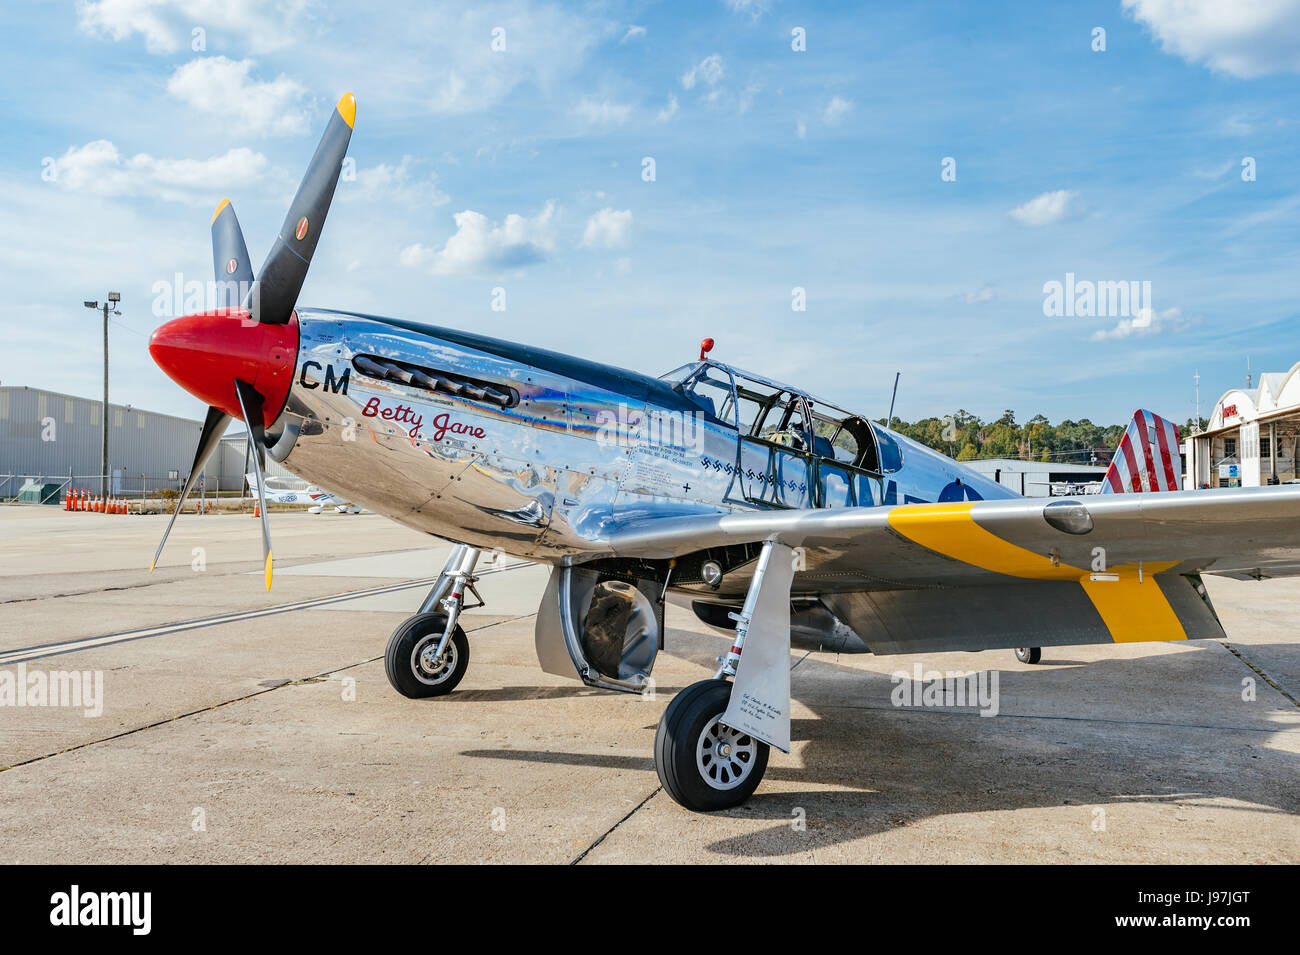 Parked vintage American P 51 Mustang fighter airplane, the Betty Jane, from WWII era. Stock Photo